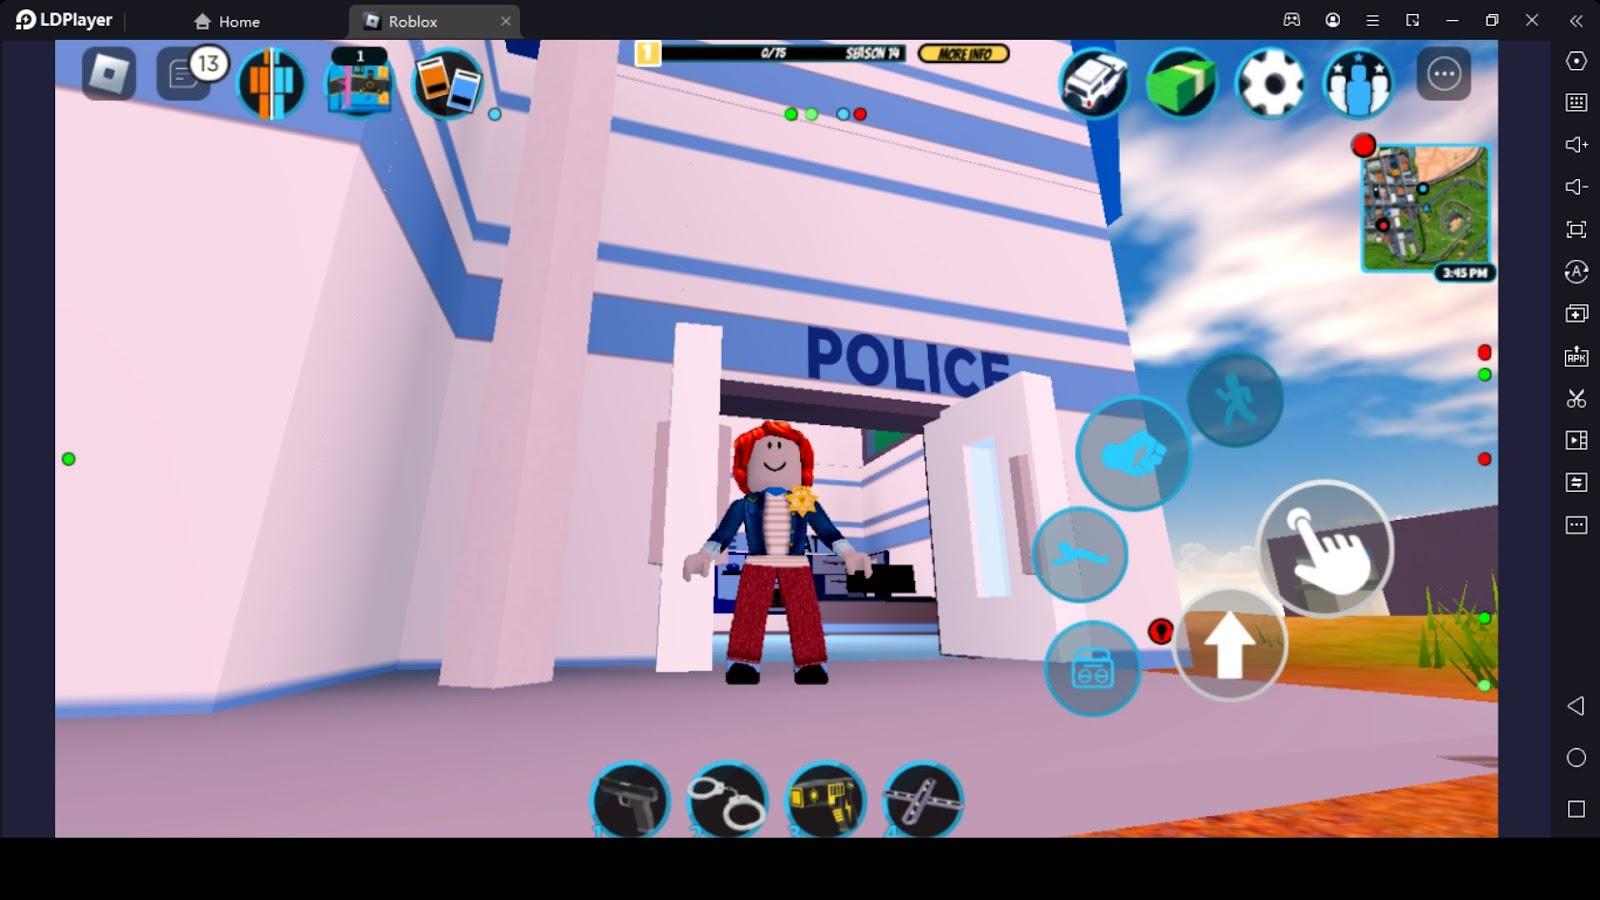 Jailbreak games for roblox for Android - Download